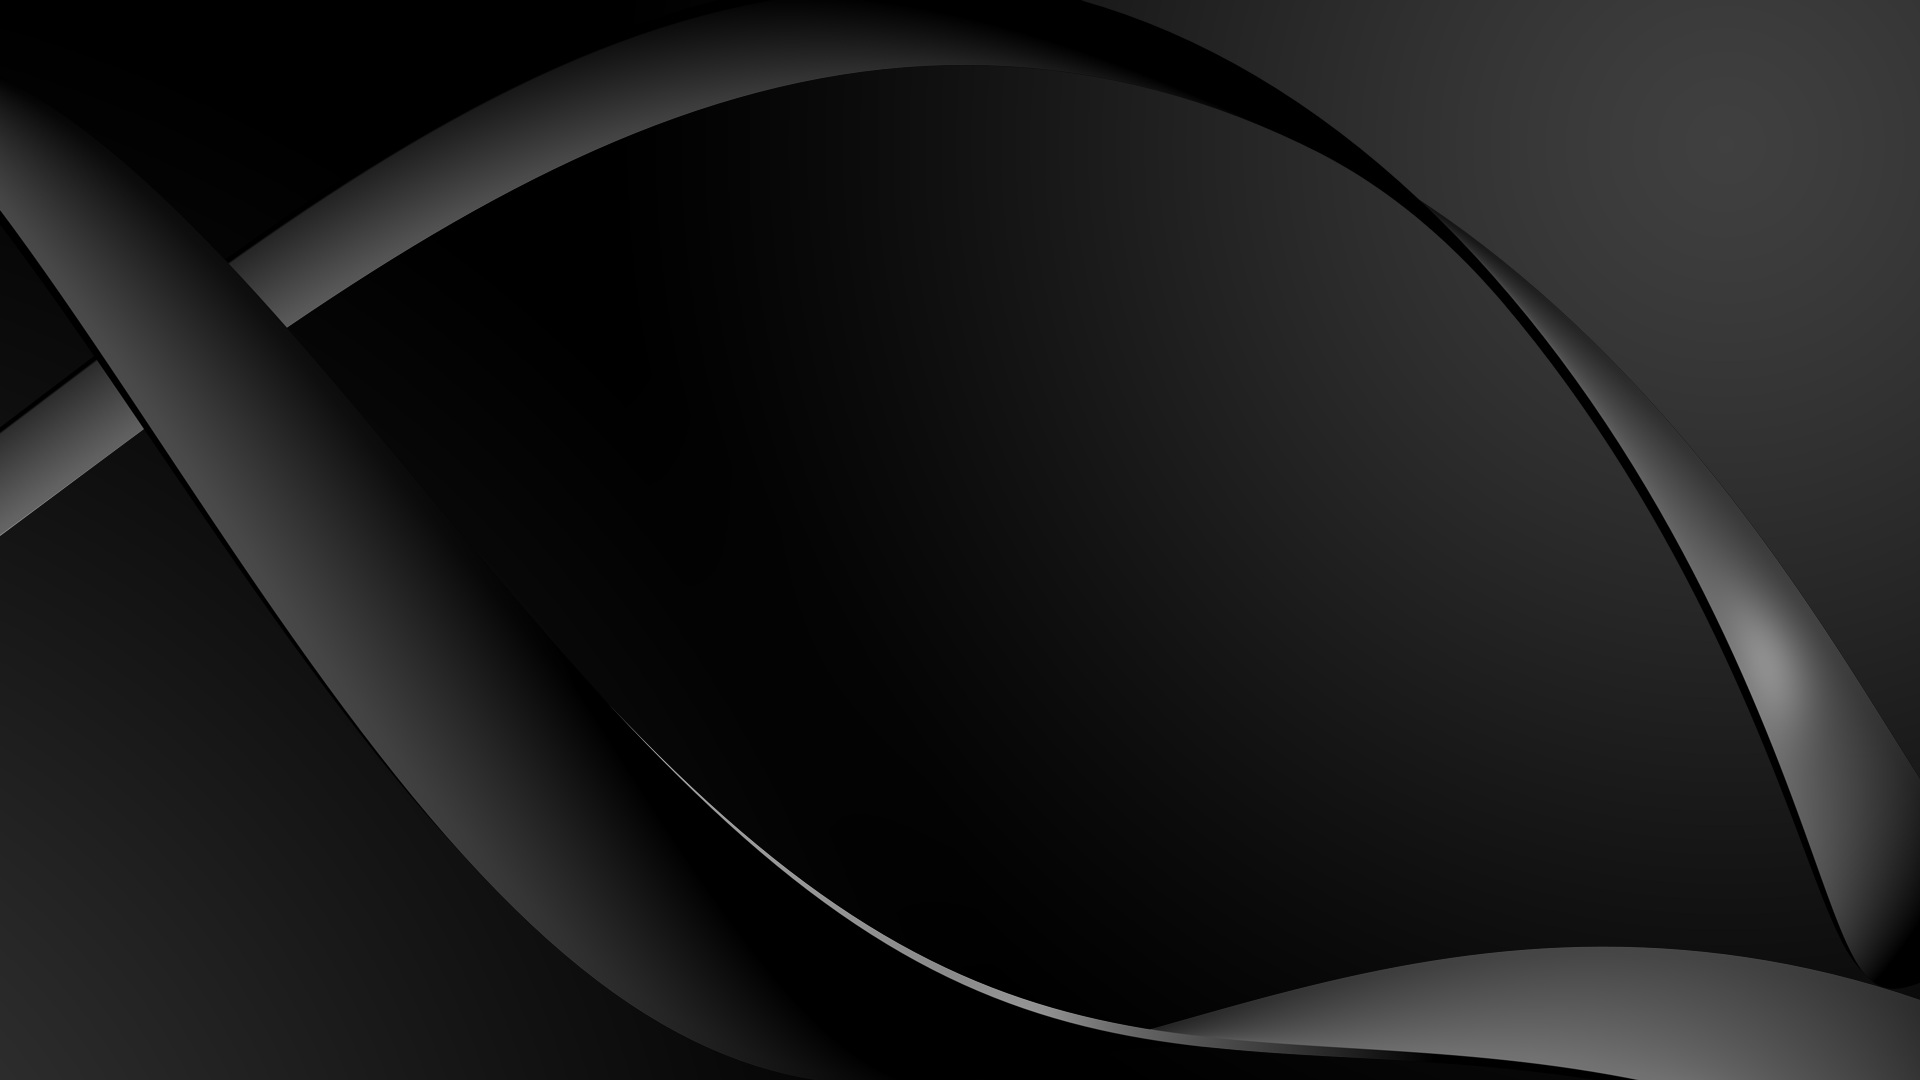 Black Abstract Wallpaper Hd Wallpapers in Abstract Imagescicom